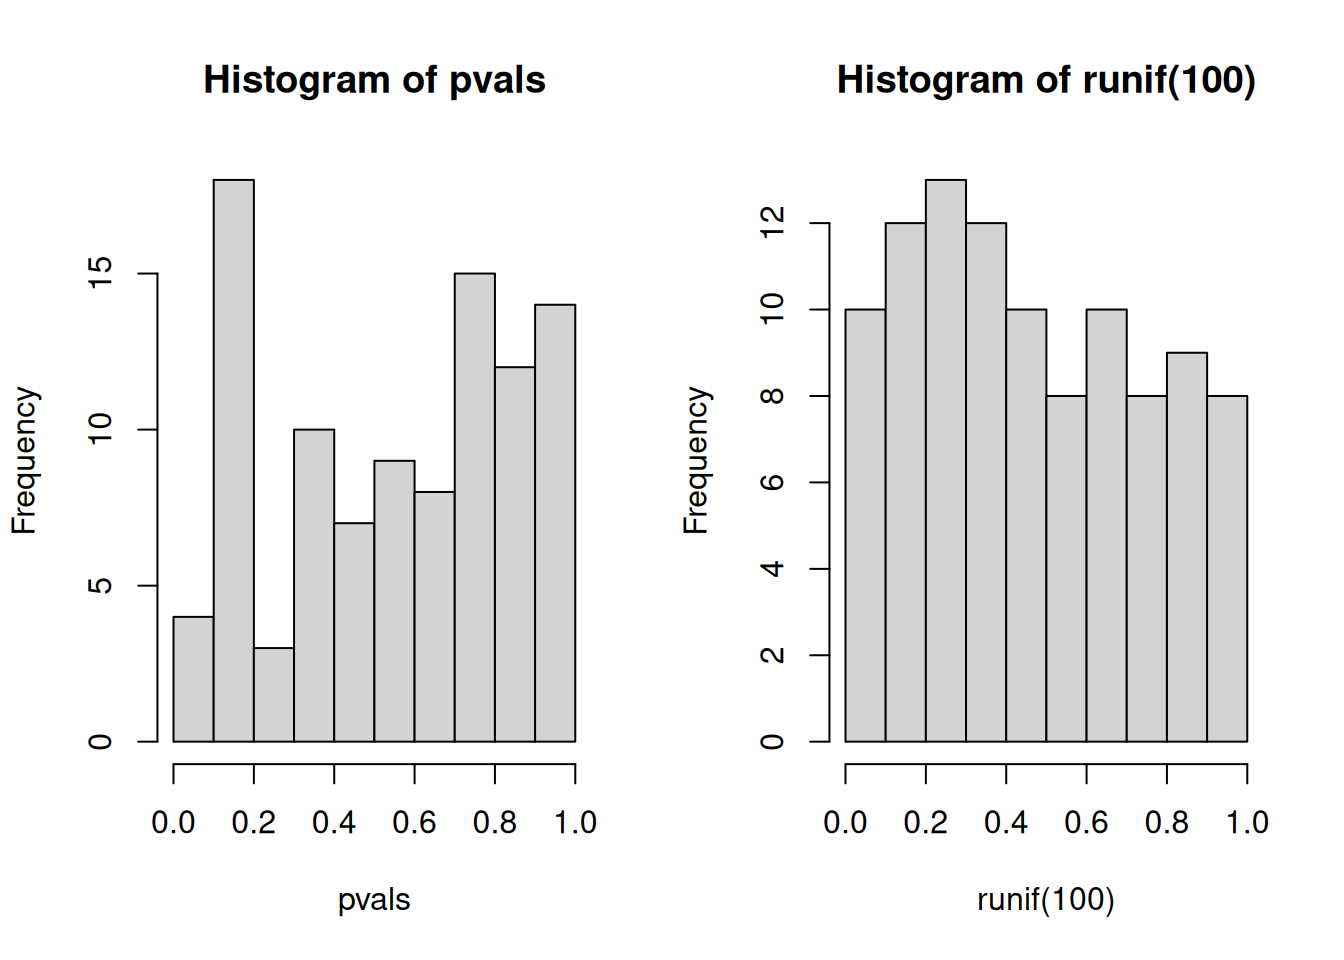 Distribution of p-values for the `tdata1` dataset (left) and 100 (p-)values uniformely distributed between 0 and 1 (right).